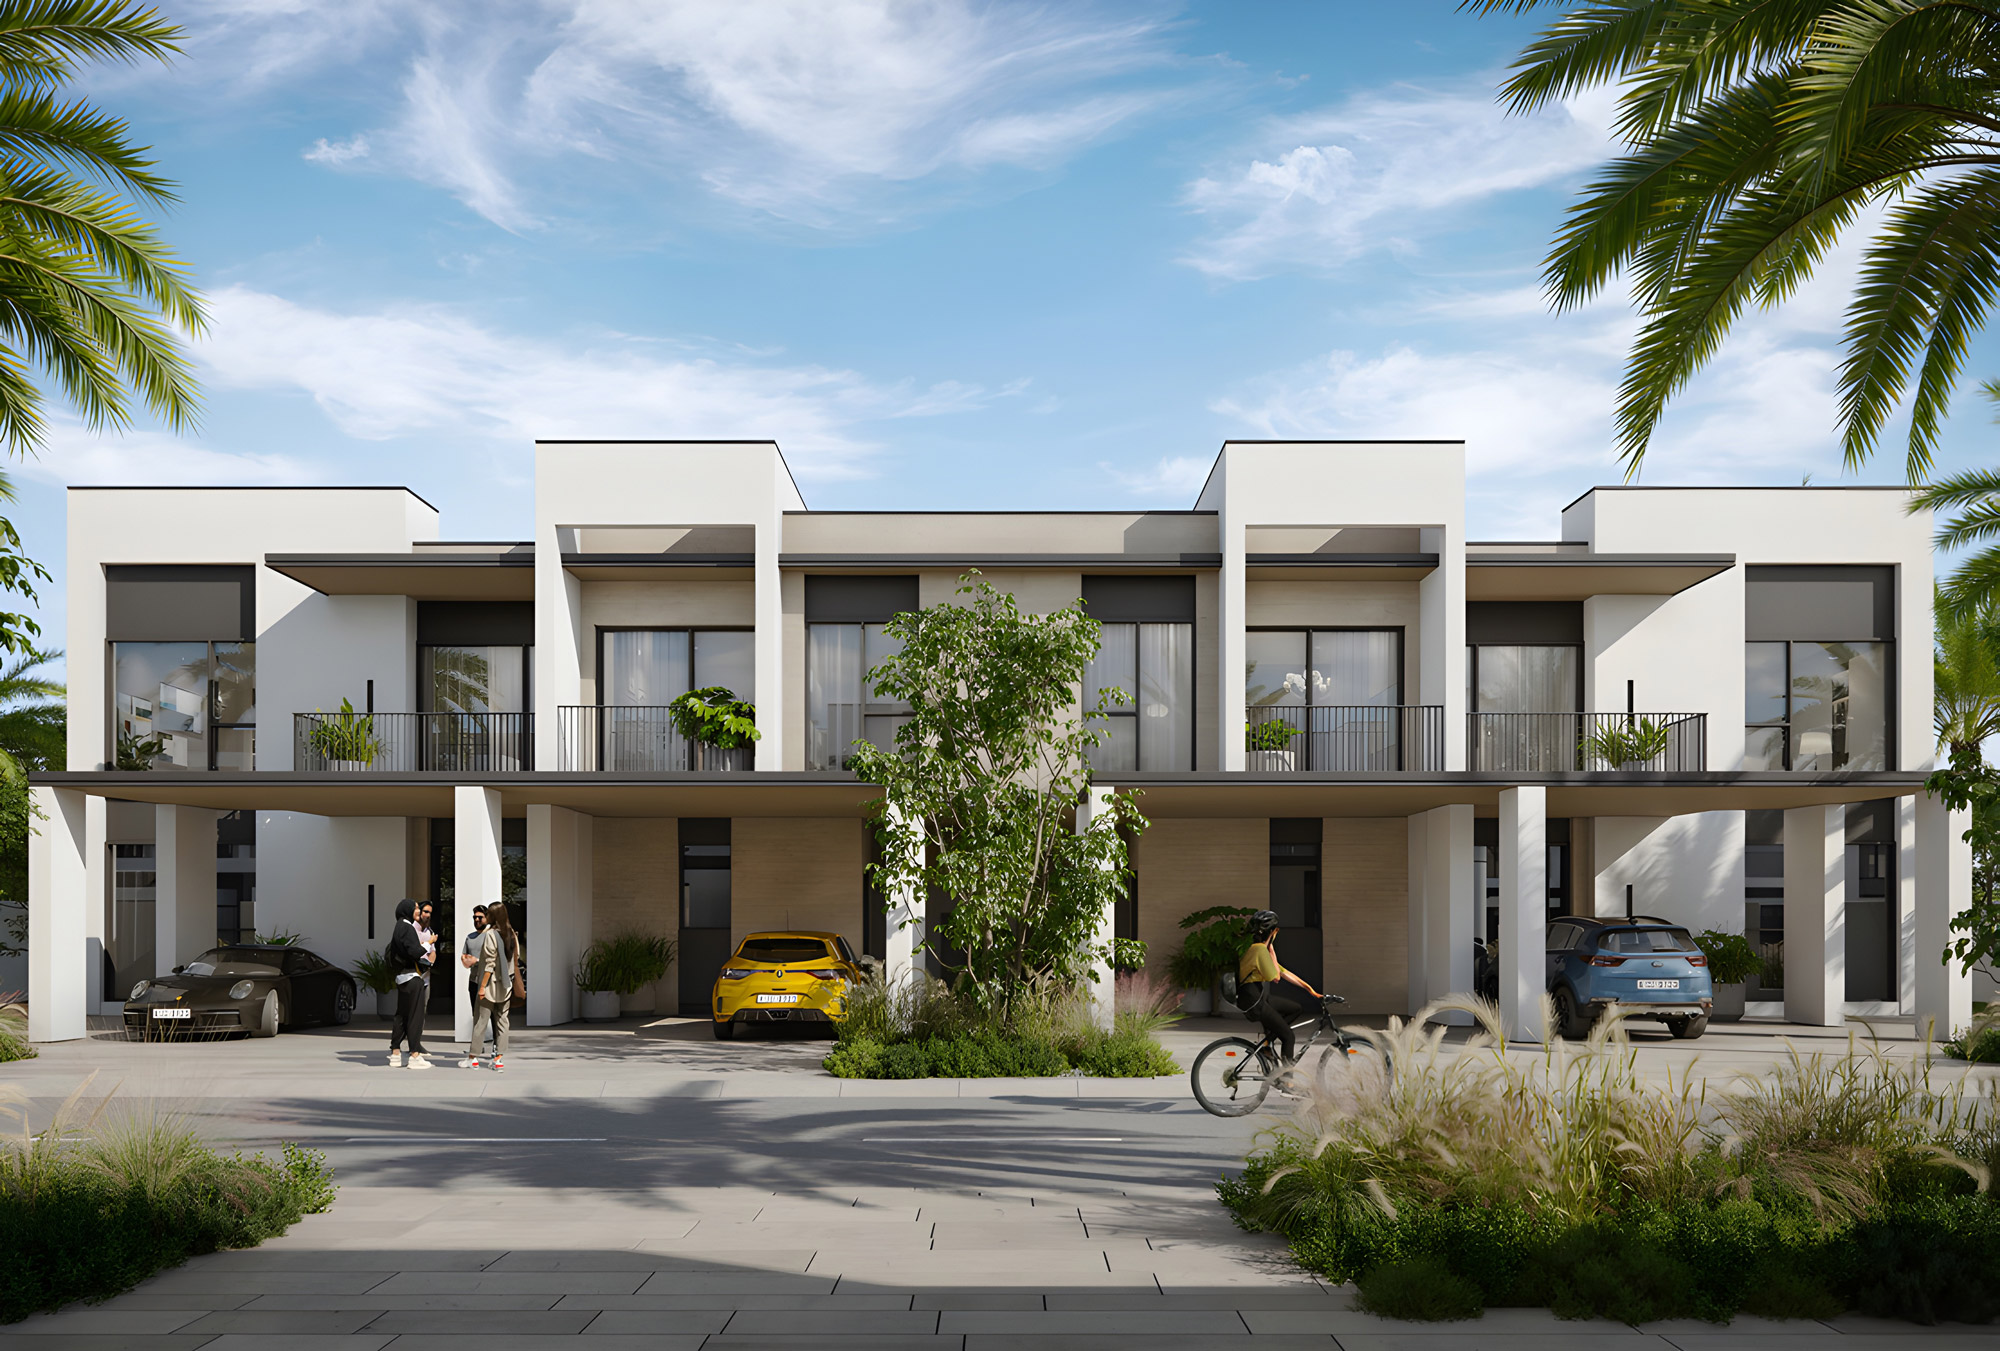 uploads/sale_property/4-br-townhouses-for-sale-in-may-at-arabian-ranches-iii/2307e1b8a275b186ad7f358e413805c6.webp